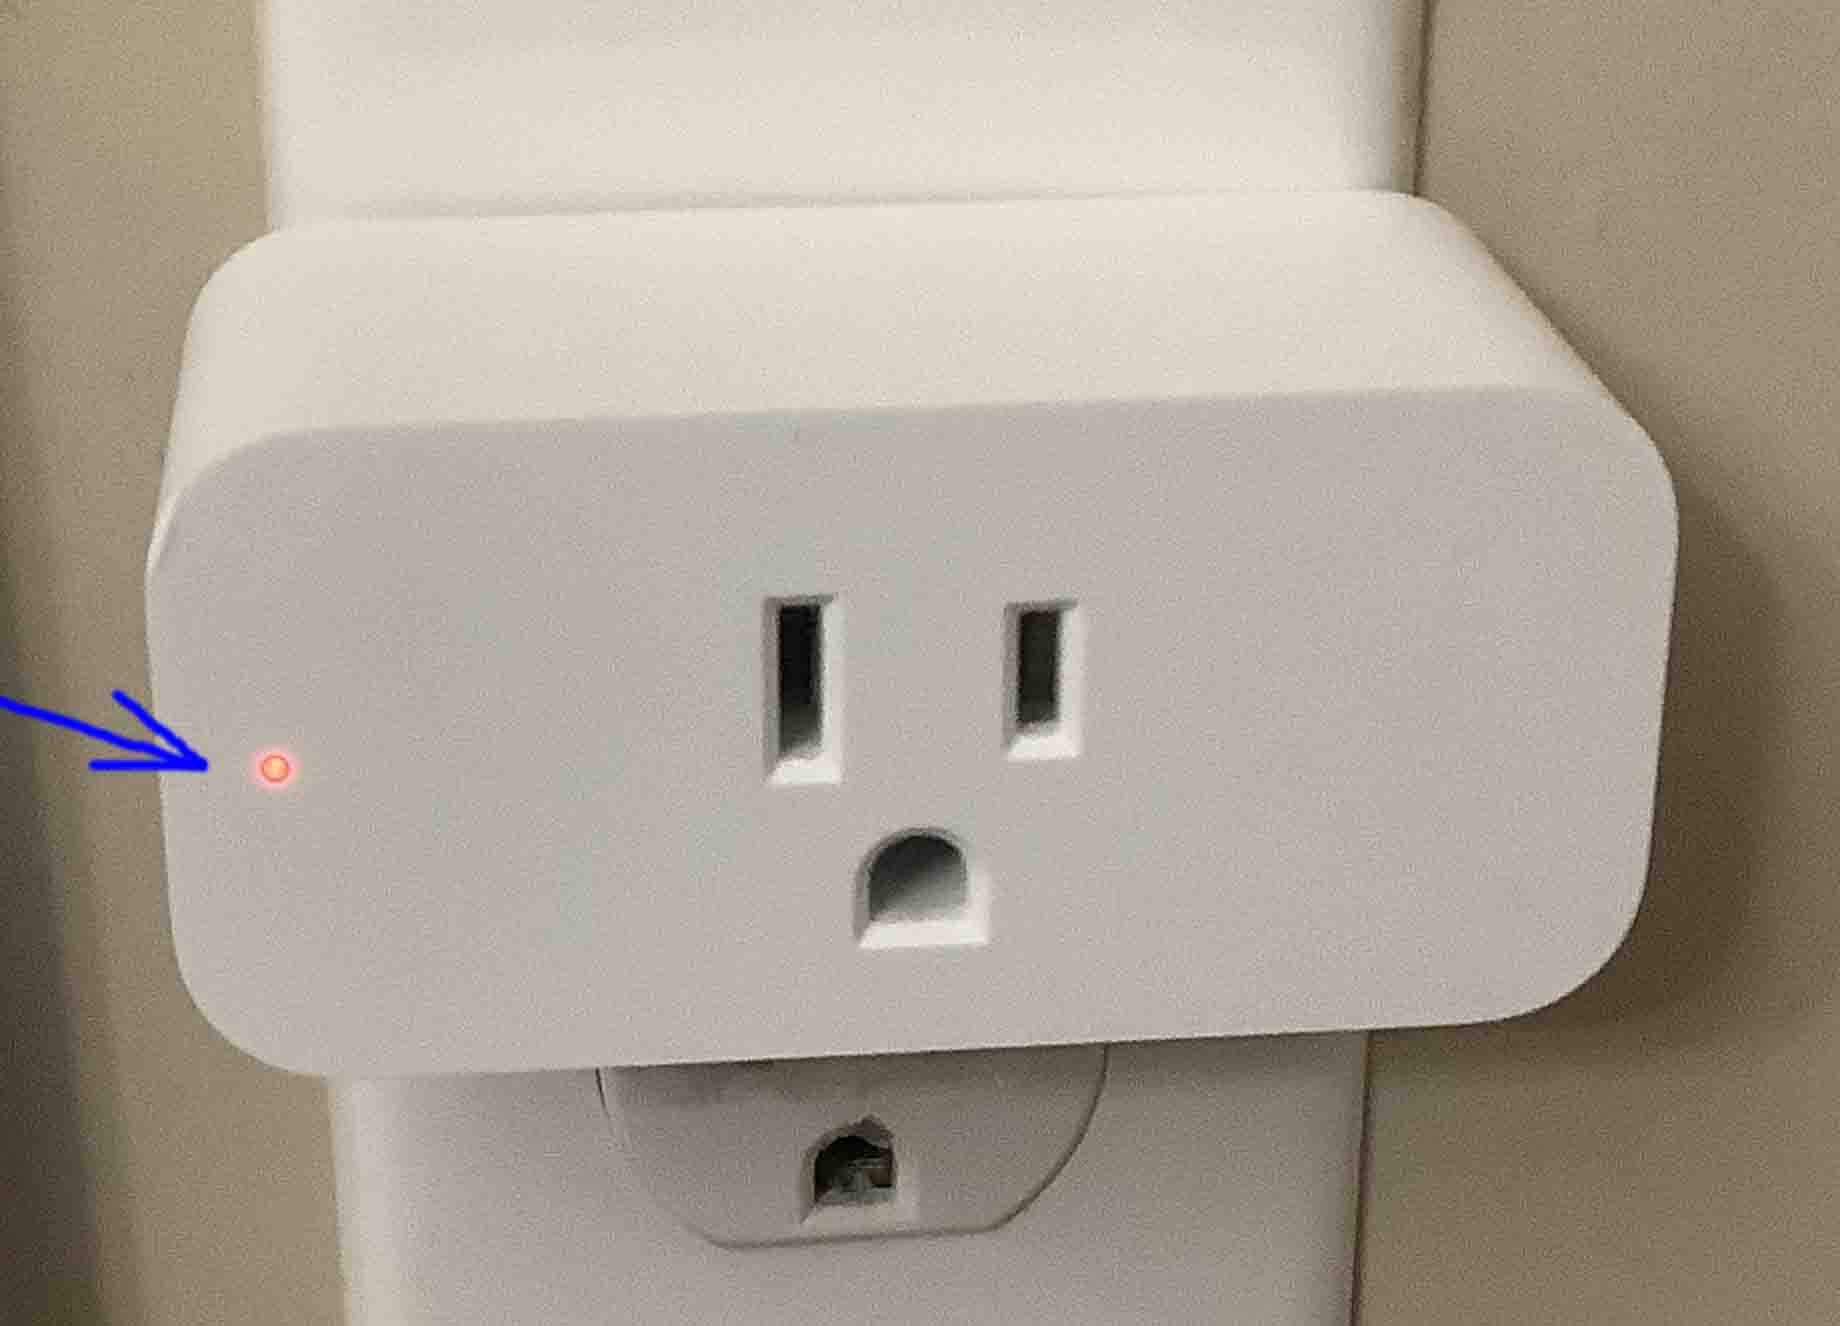 Why Is My Smart Plug Blinking Red